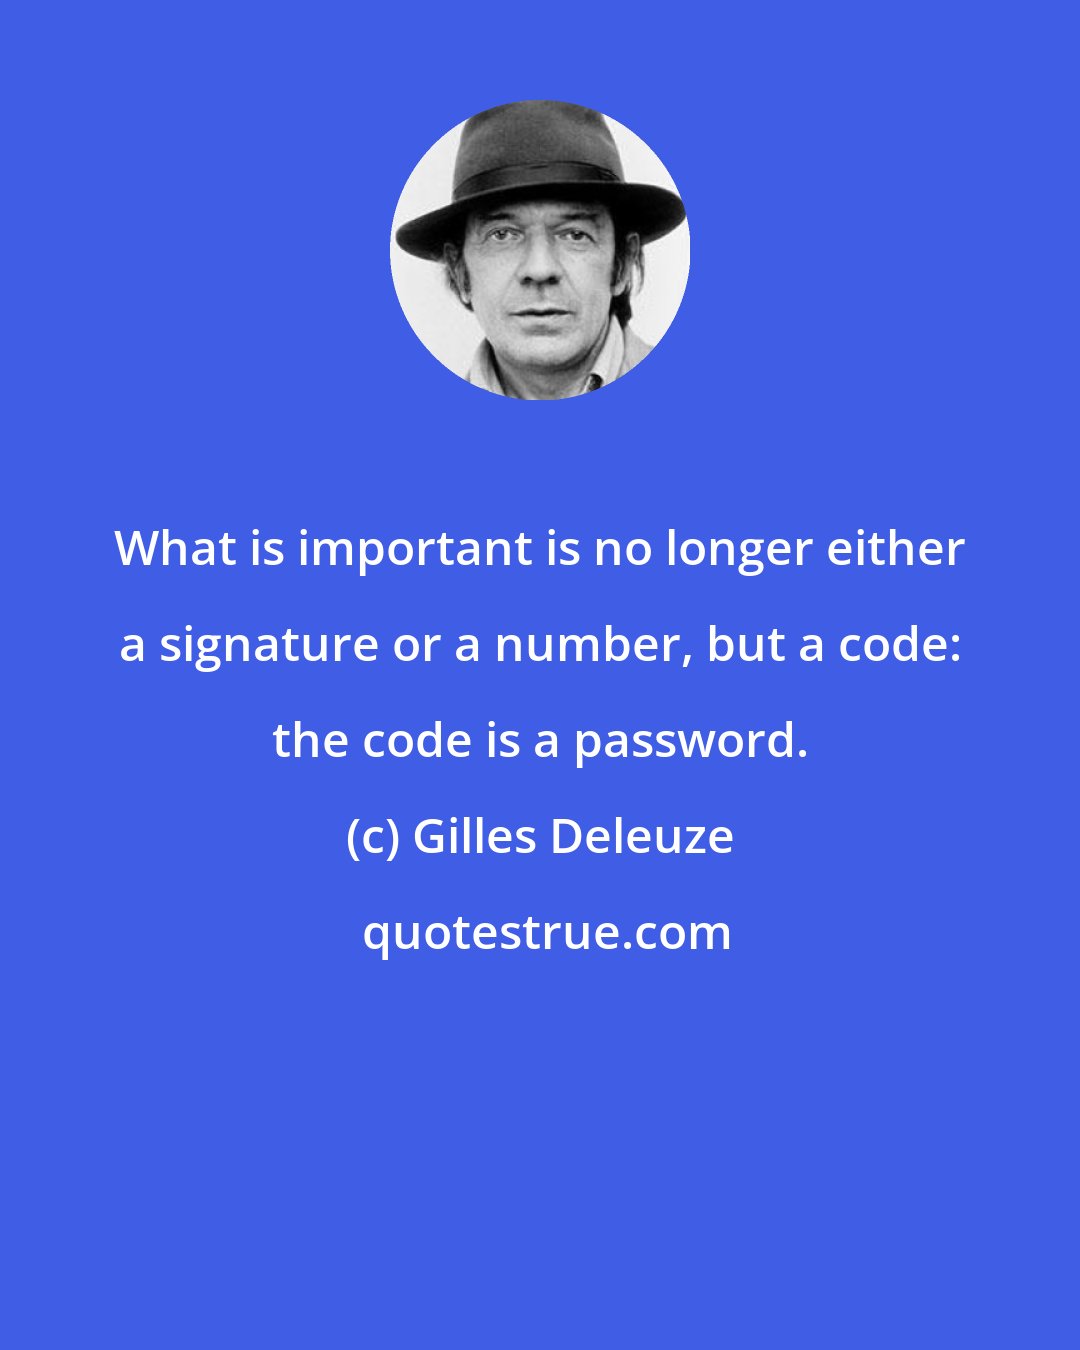 Gilles Deleuze: What is important is no longer either a signature or a number, but a code: the code is a password.